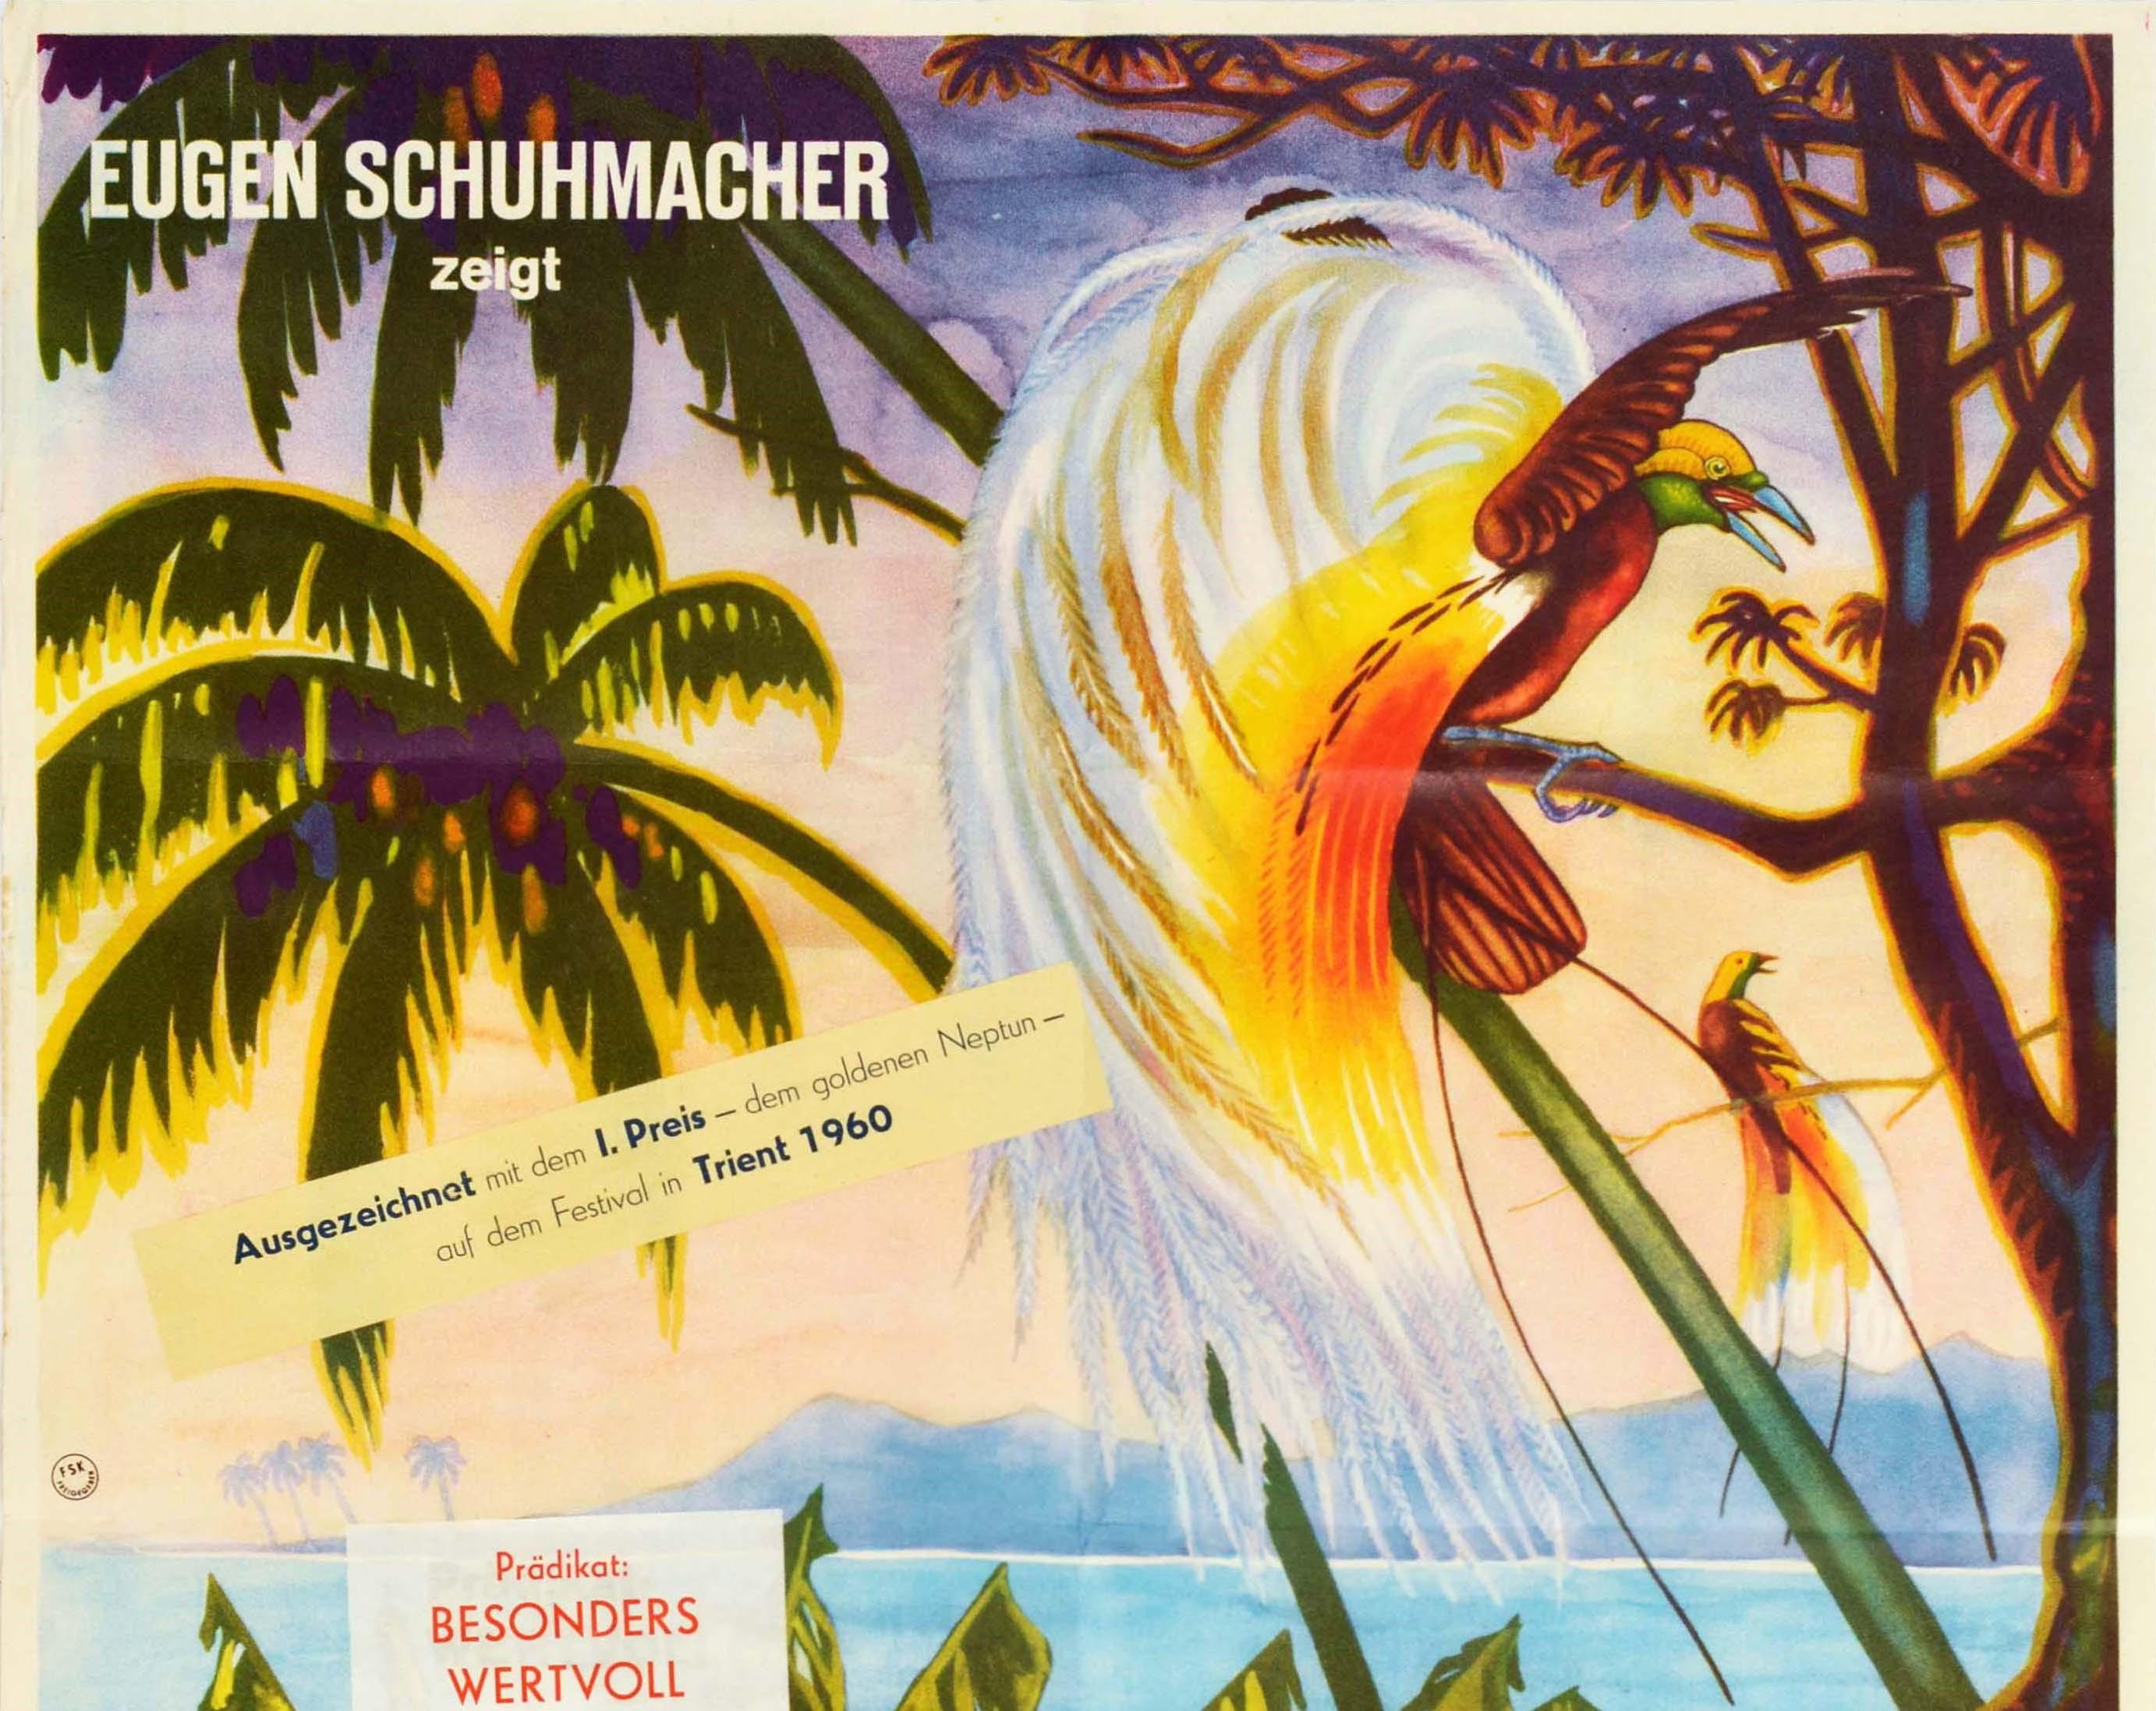 Original vintage film poster for a German nature documentary about New Guinea - Geisterland Der Sudsee / The Fabulous South Seas (Spirit Land of the South Seas) - directed by Eugen Schuhmacher featuring a tropical rainforest design with a man in a